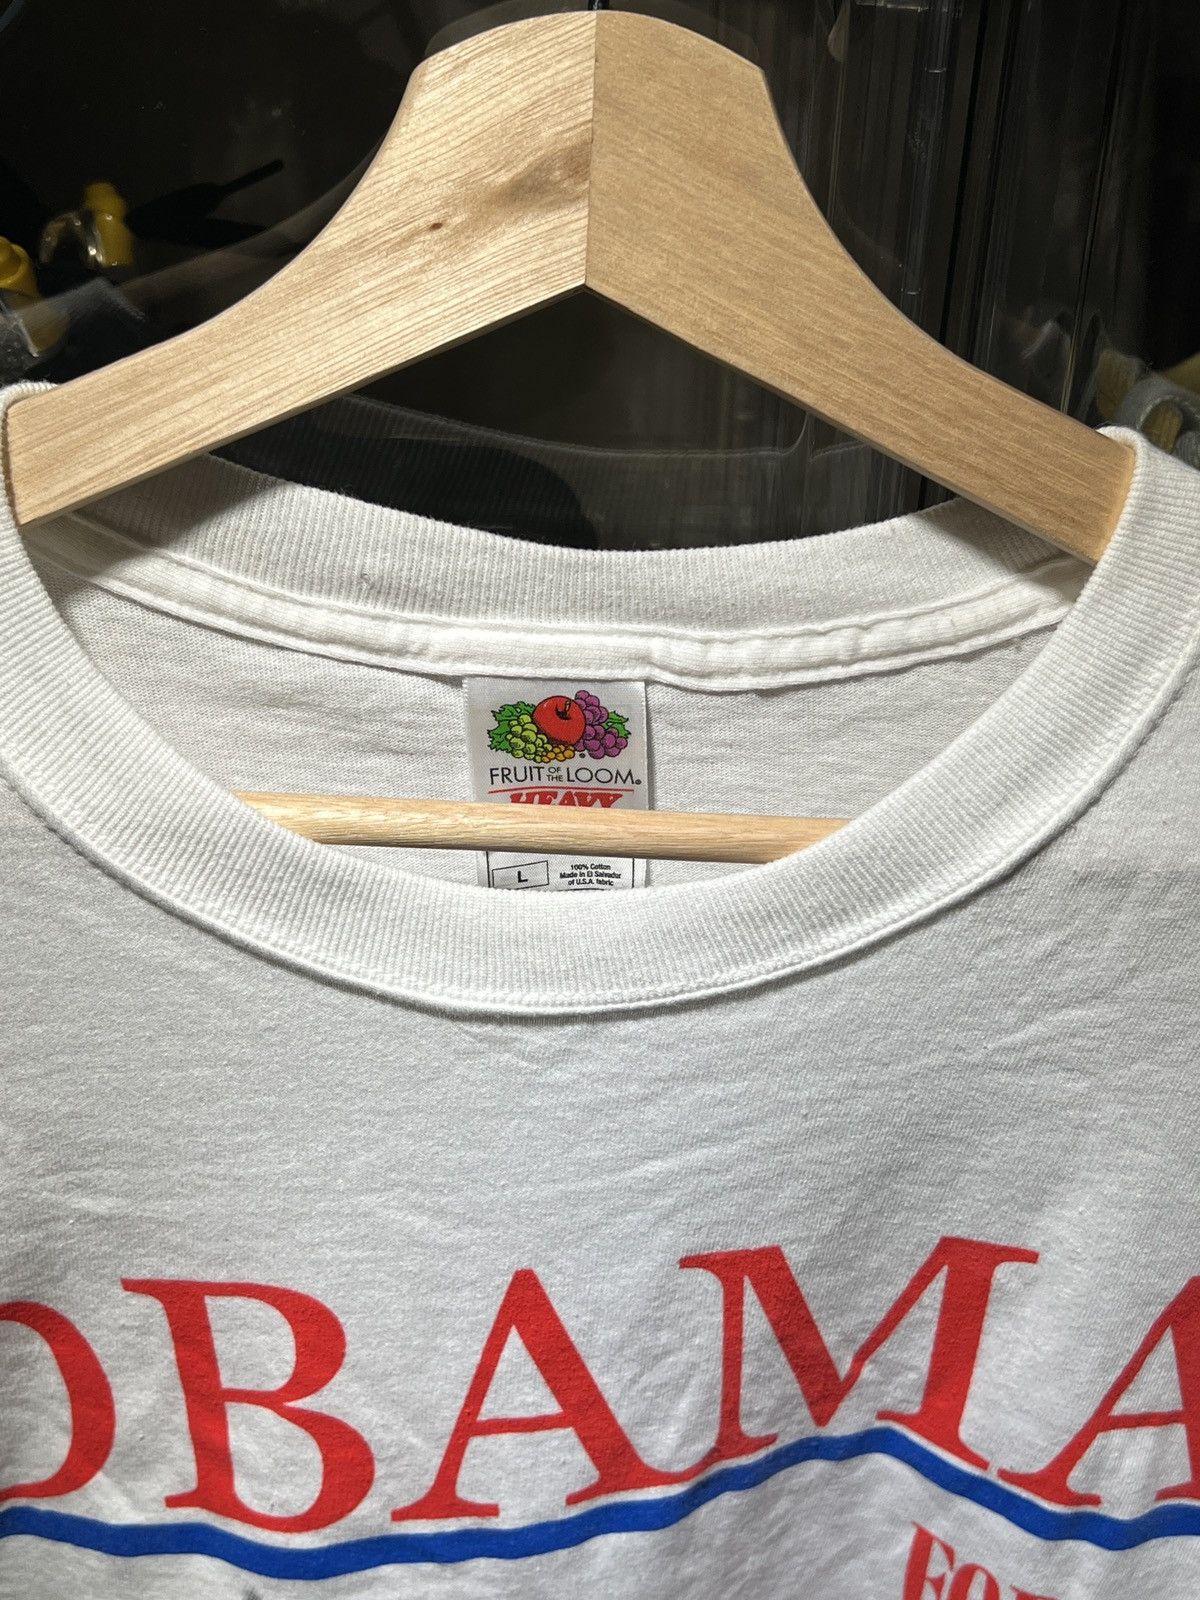 Vintage 2008 Obama For America Tee Size US L / EU 52-54 / 3 - 2 Preview